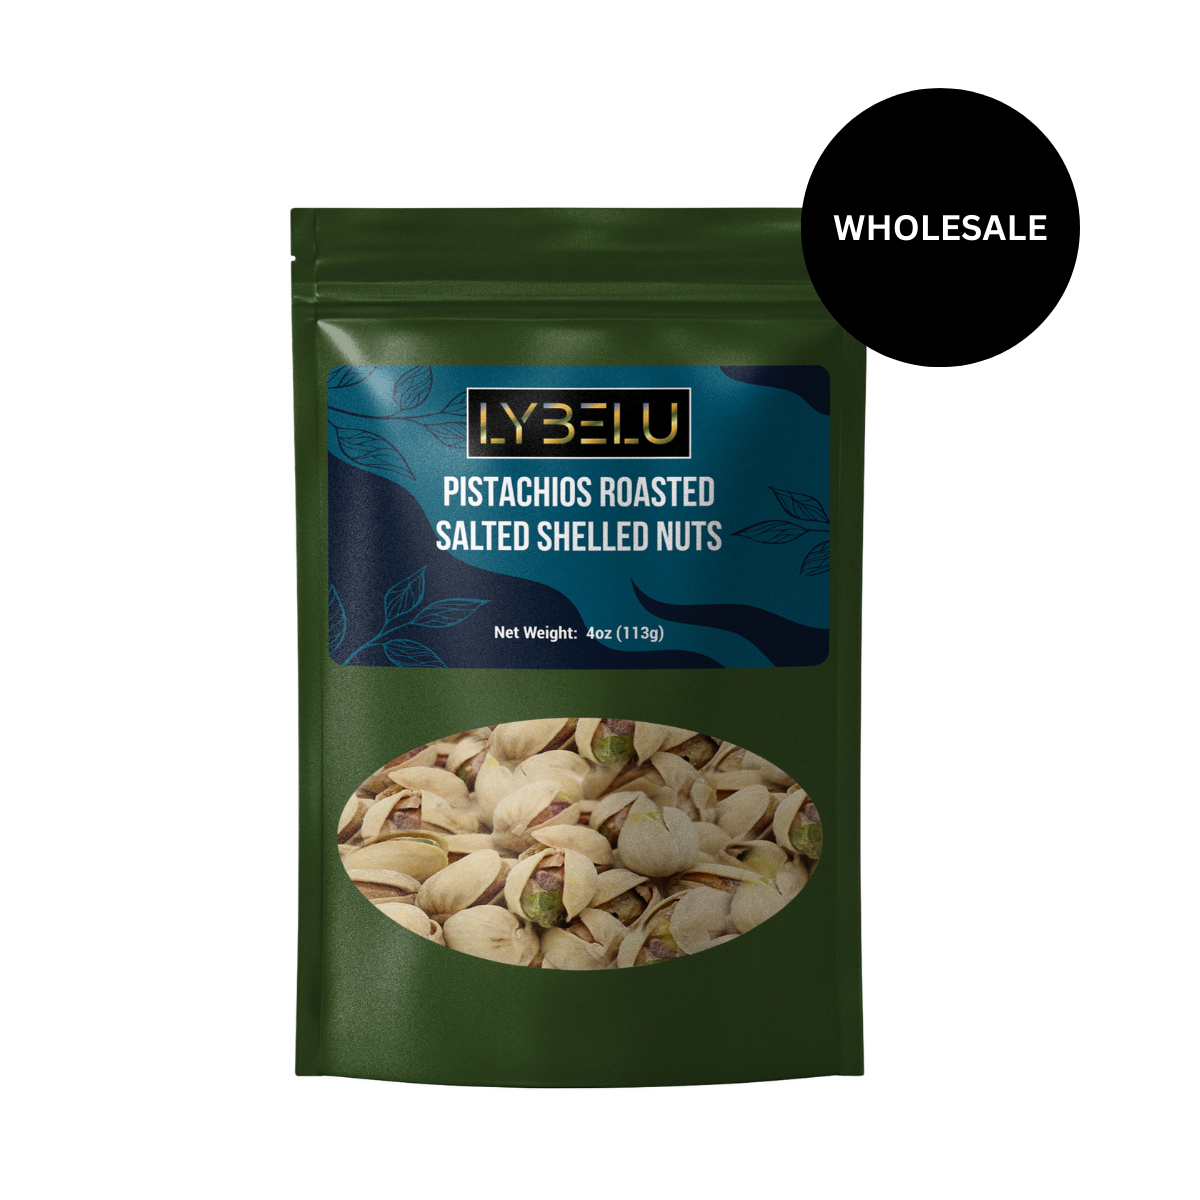 Pistachios Roasted Salted Shelled Nuts – 4oz